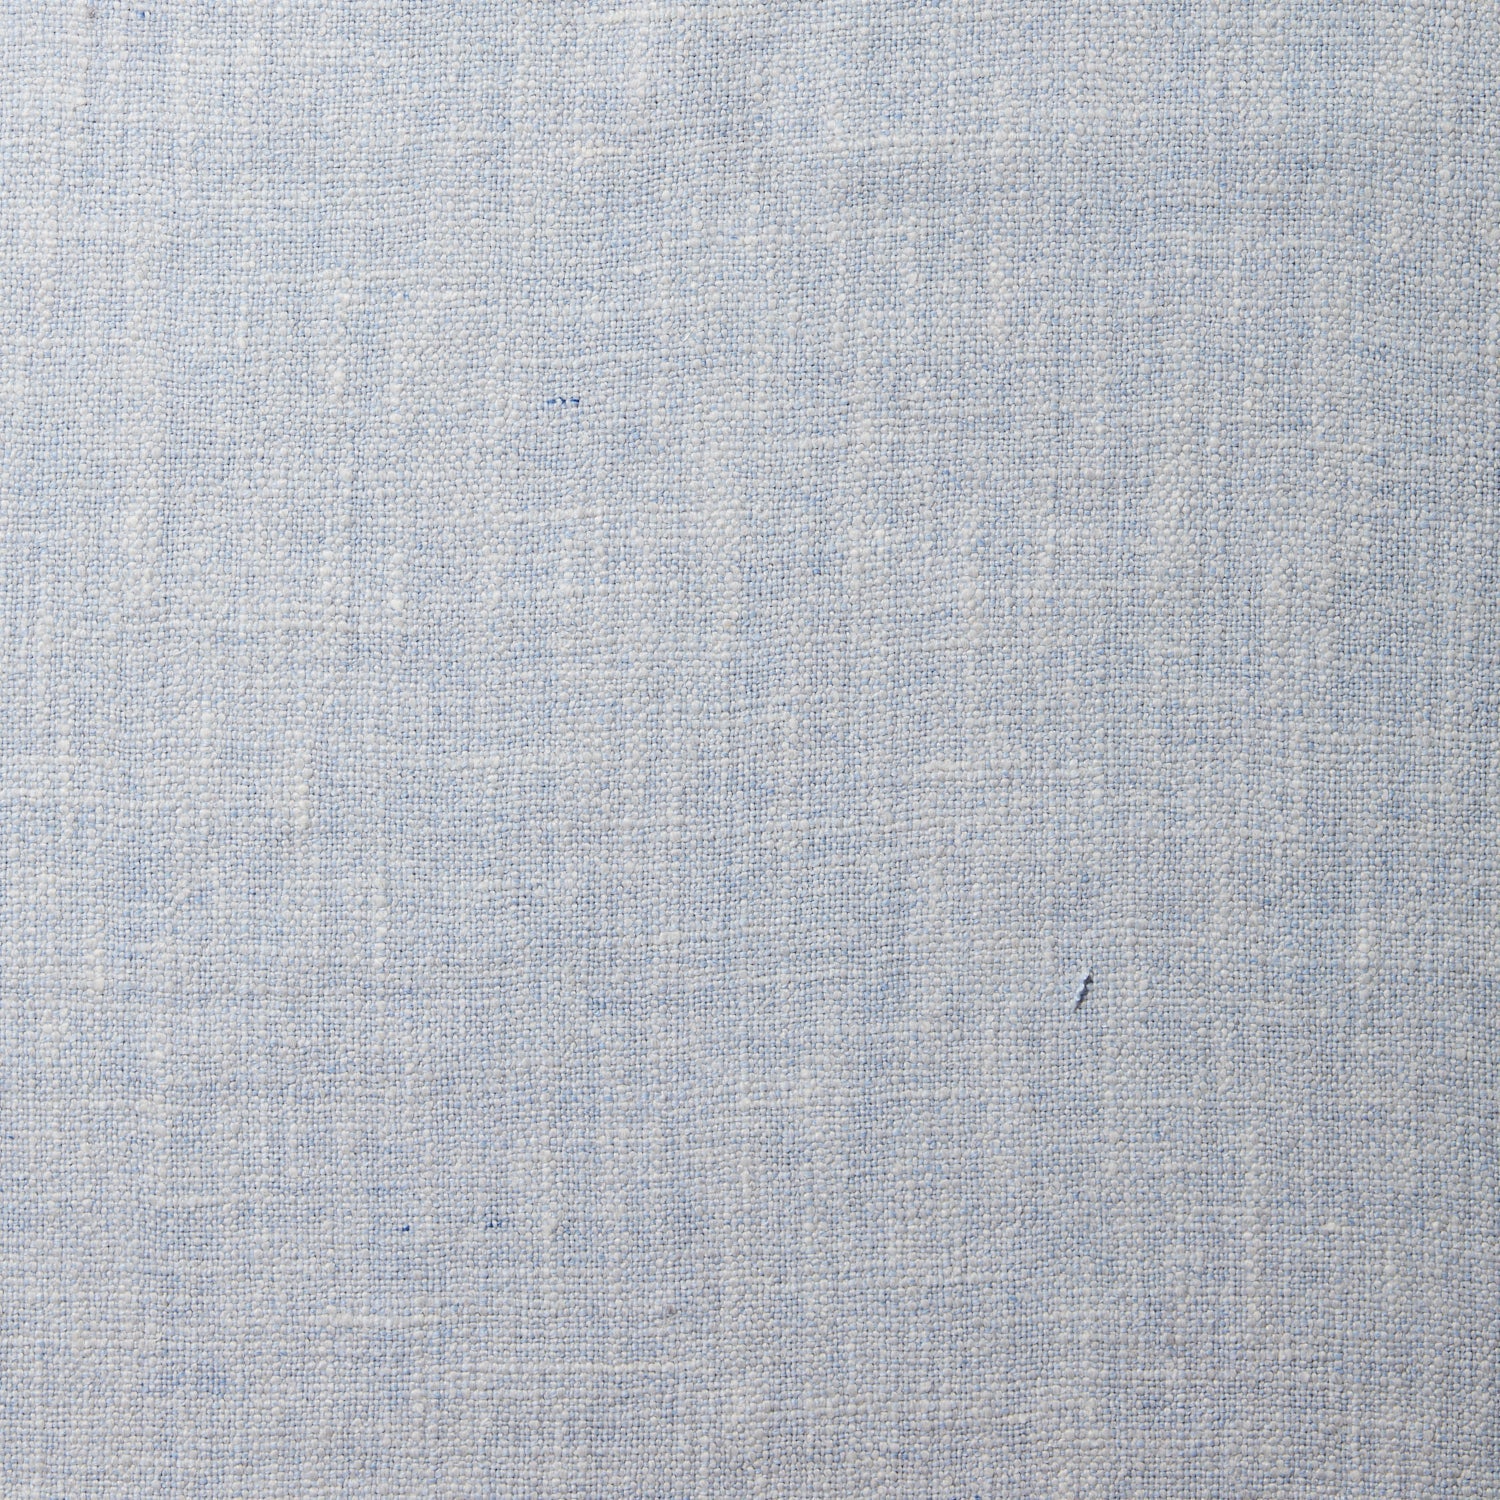 A swatch of blended linen fabric in a mottled light blue color.